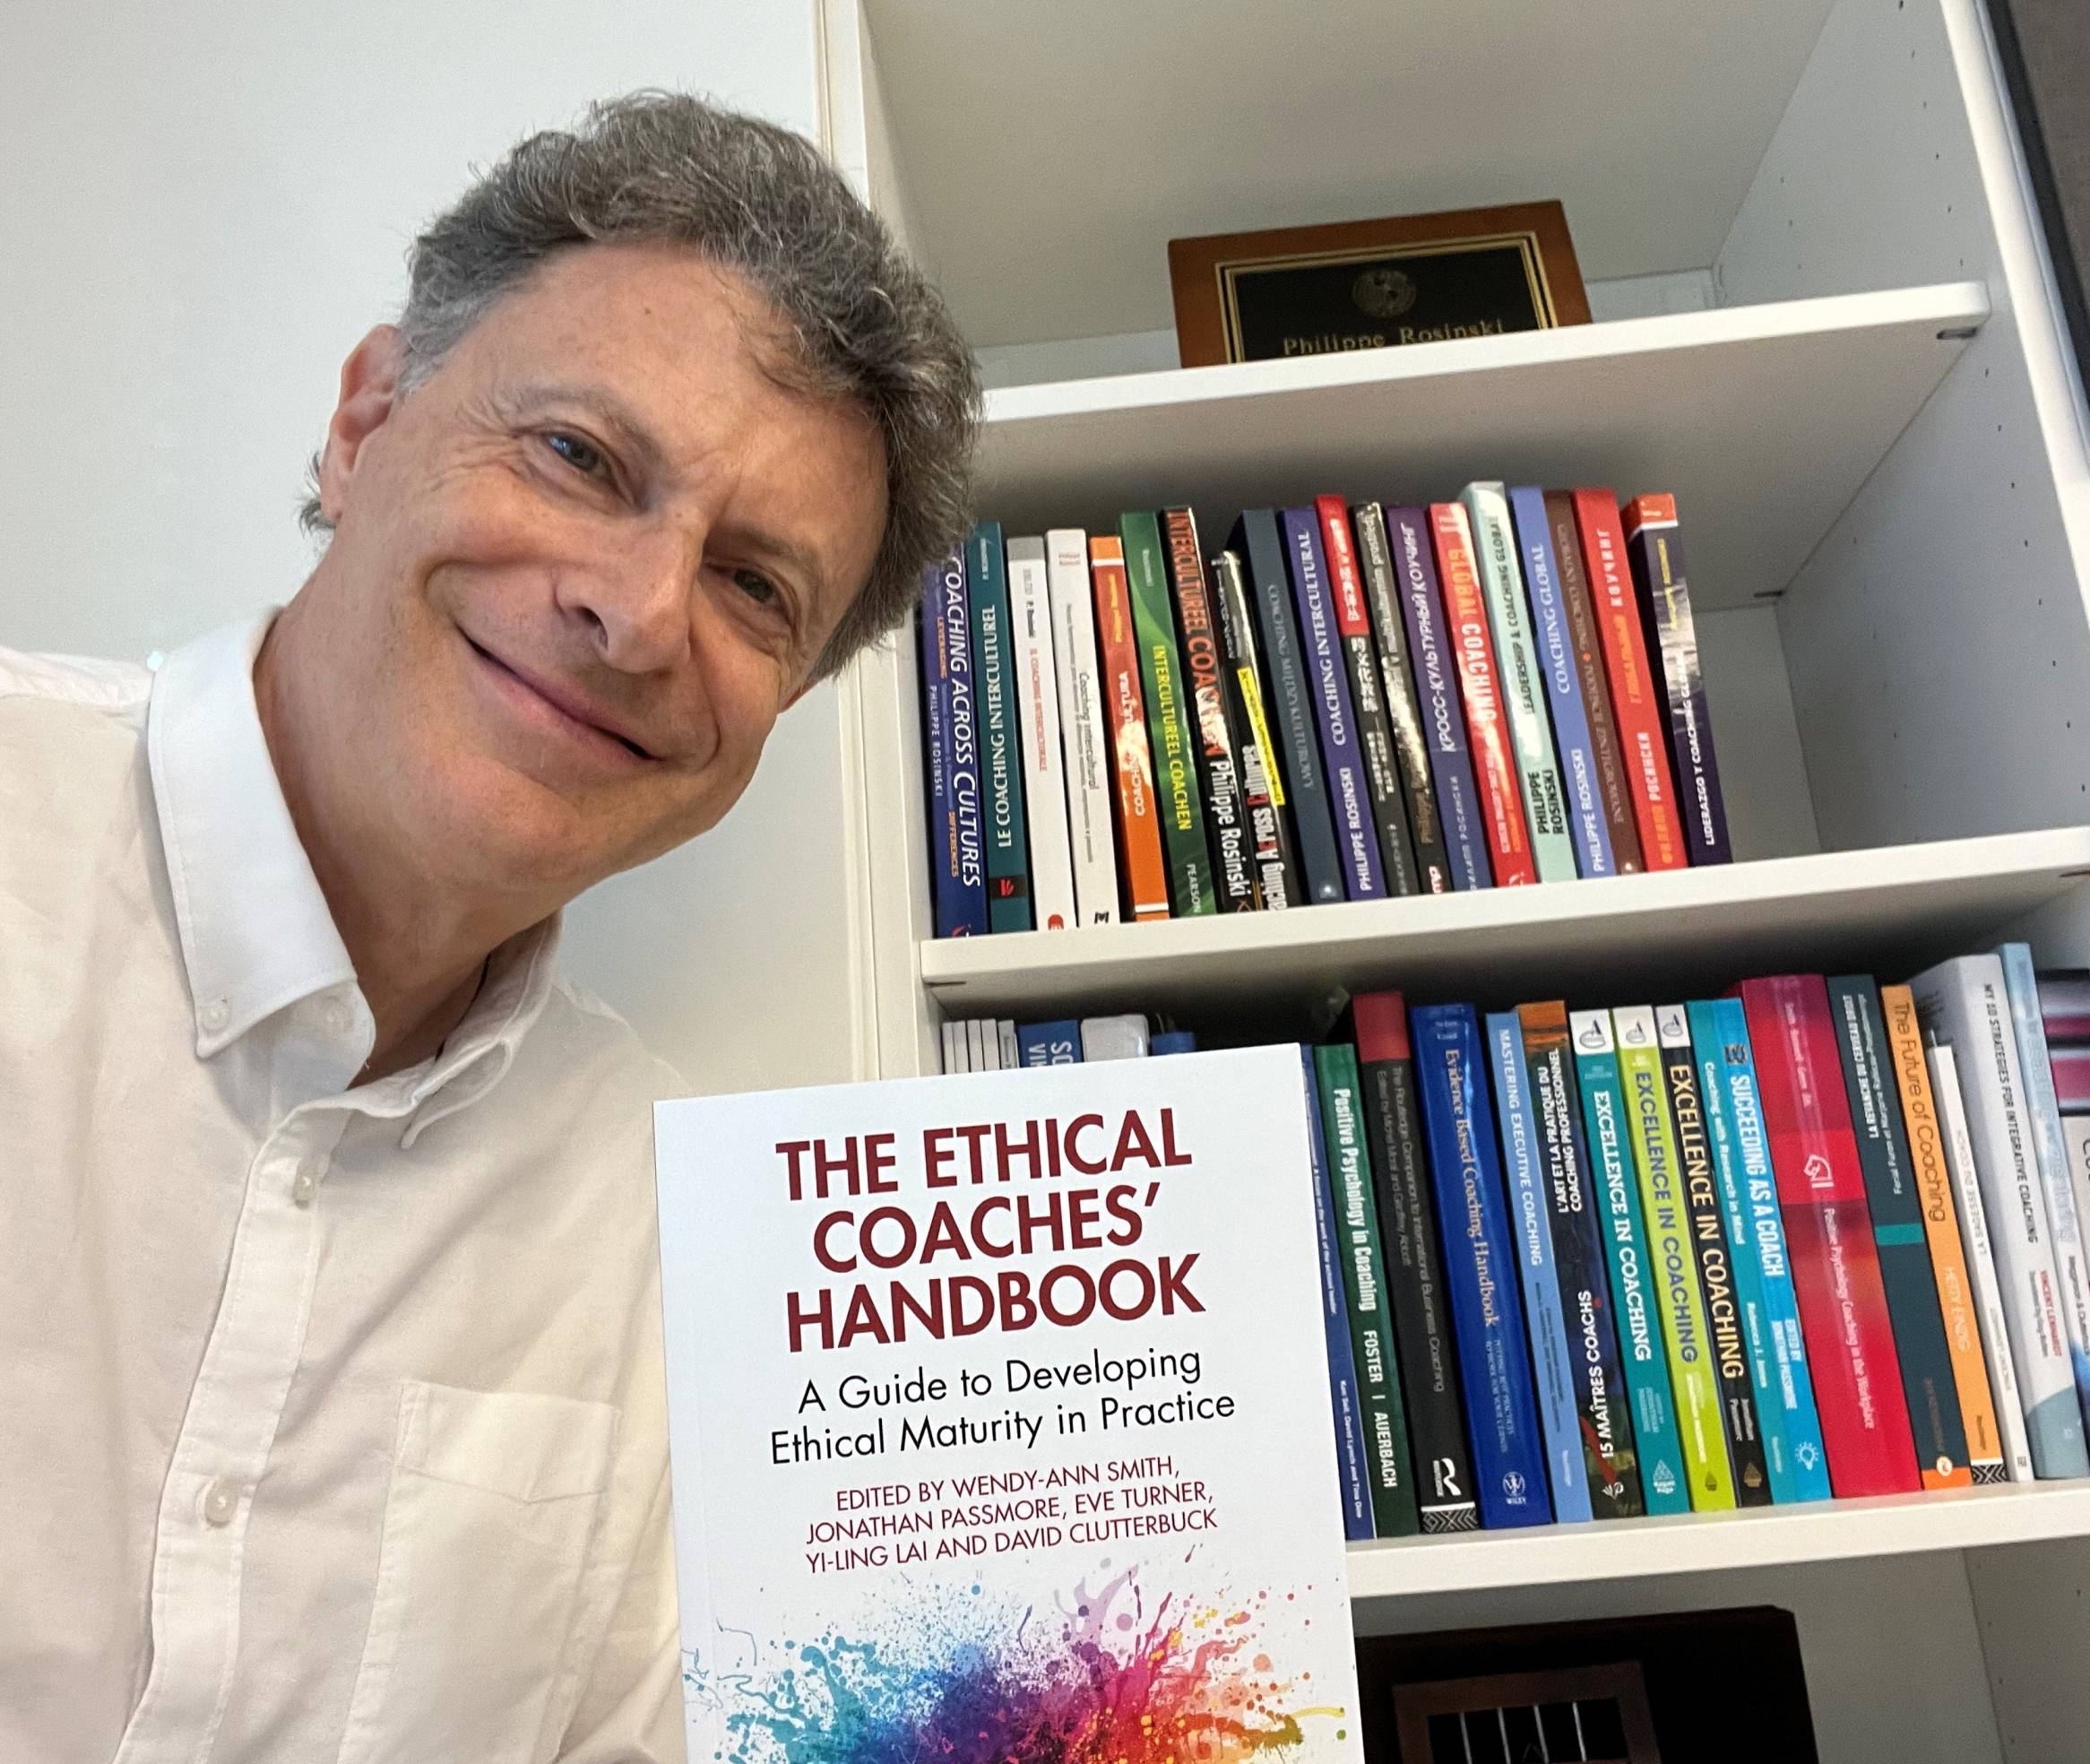 Publication of The Ethical Coaches’ Handbook